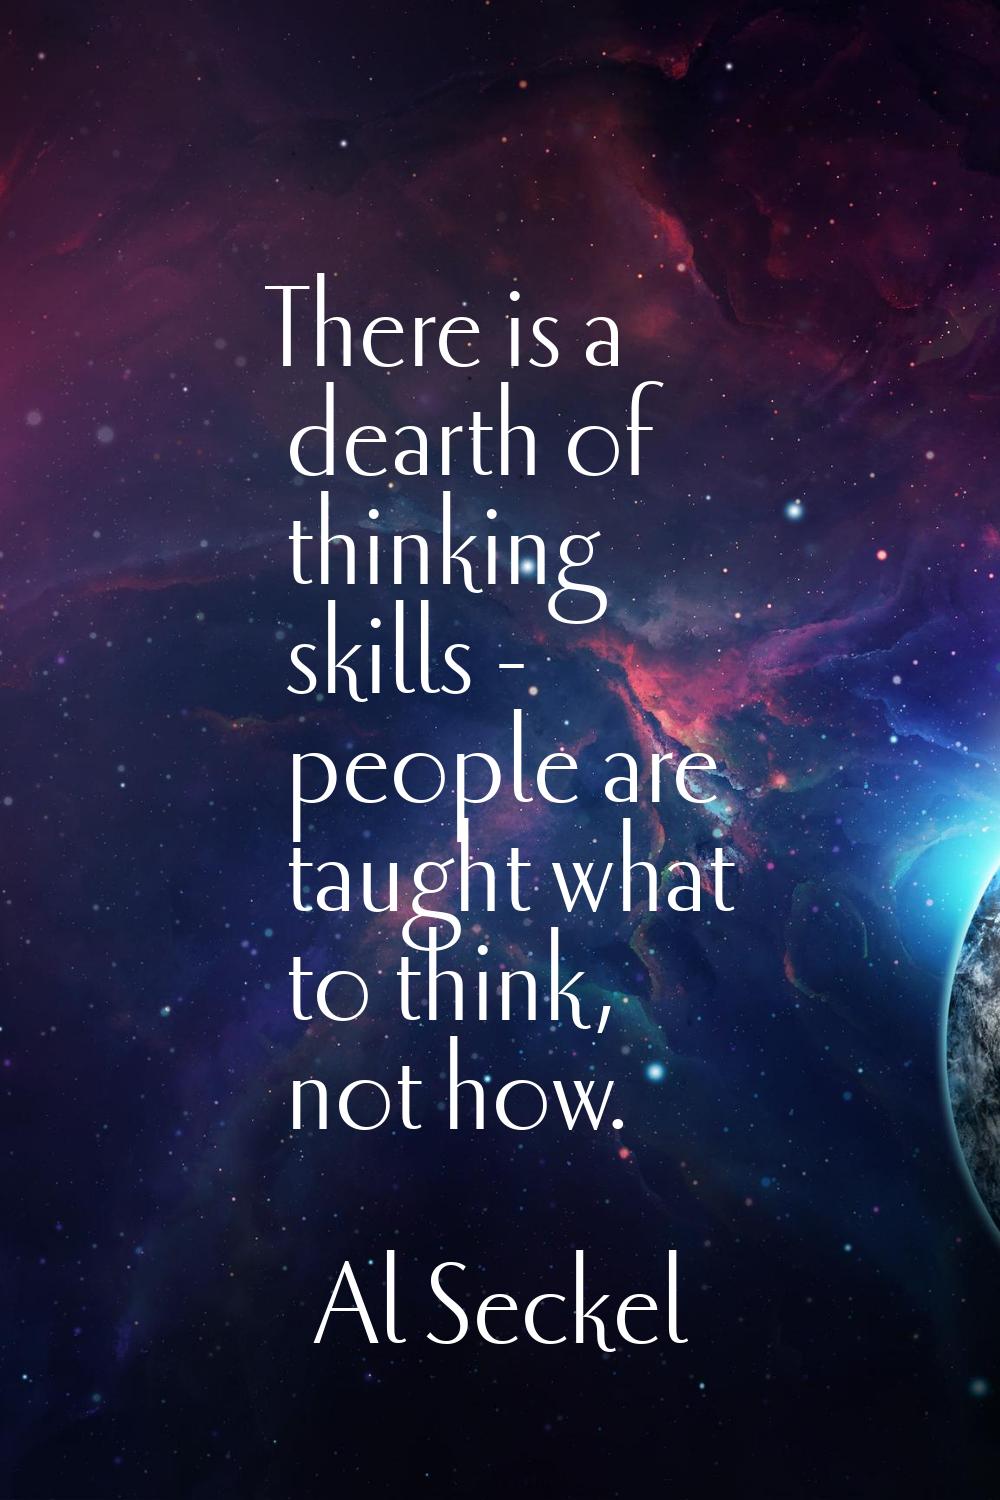 There is a dearth of thinking skills - people are taught what to think, not how.